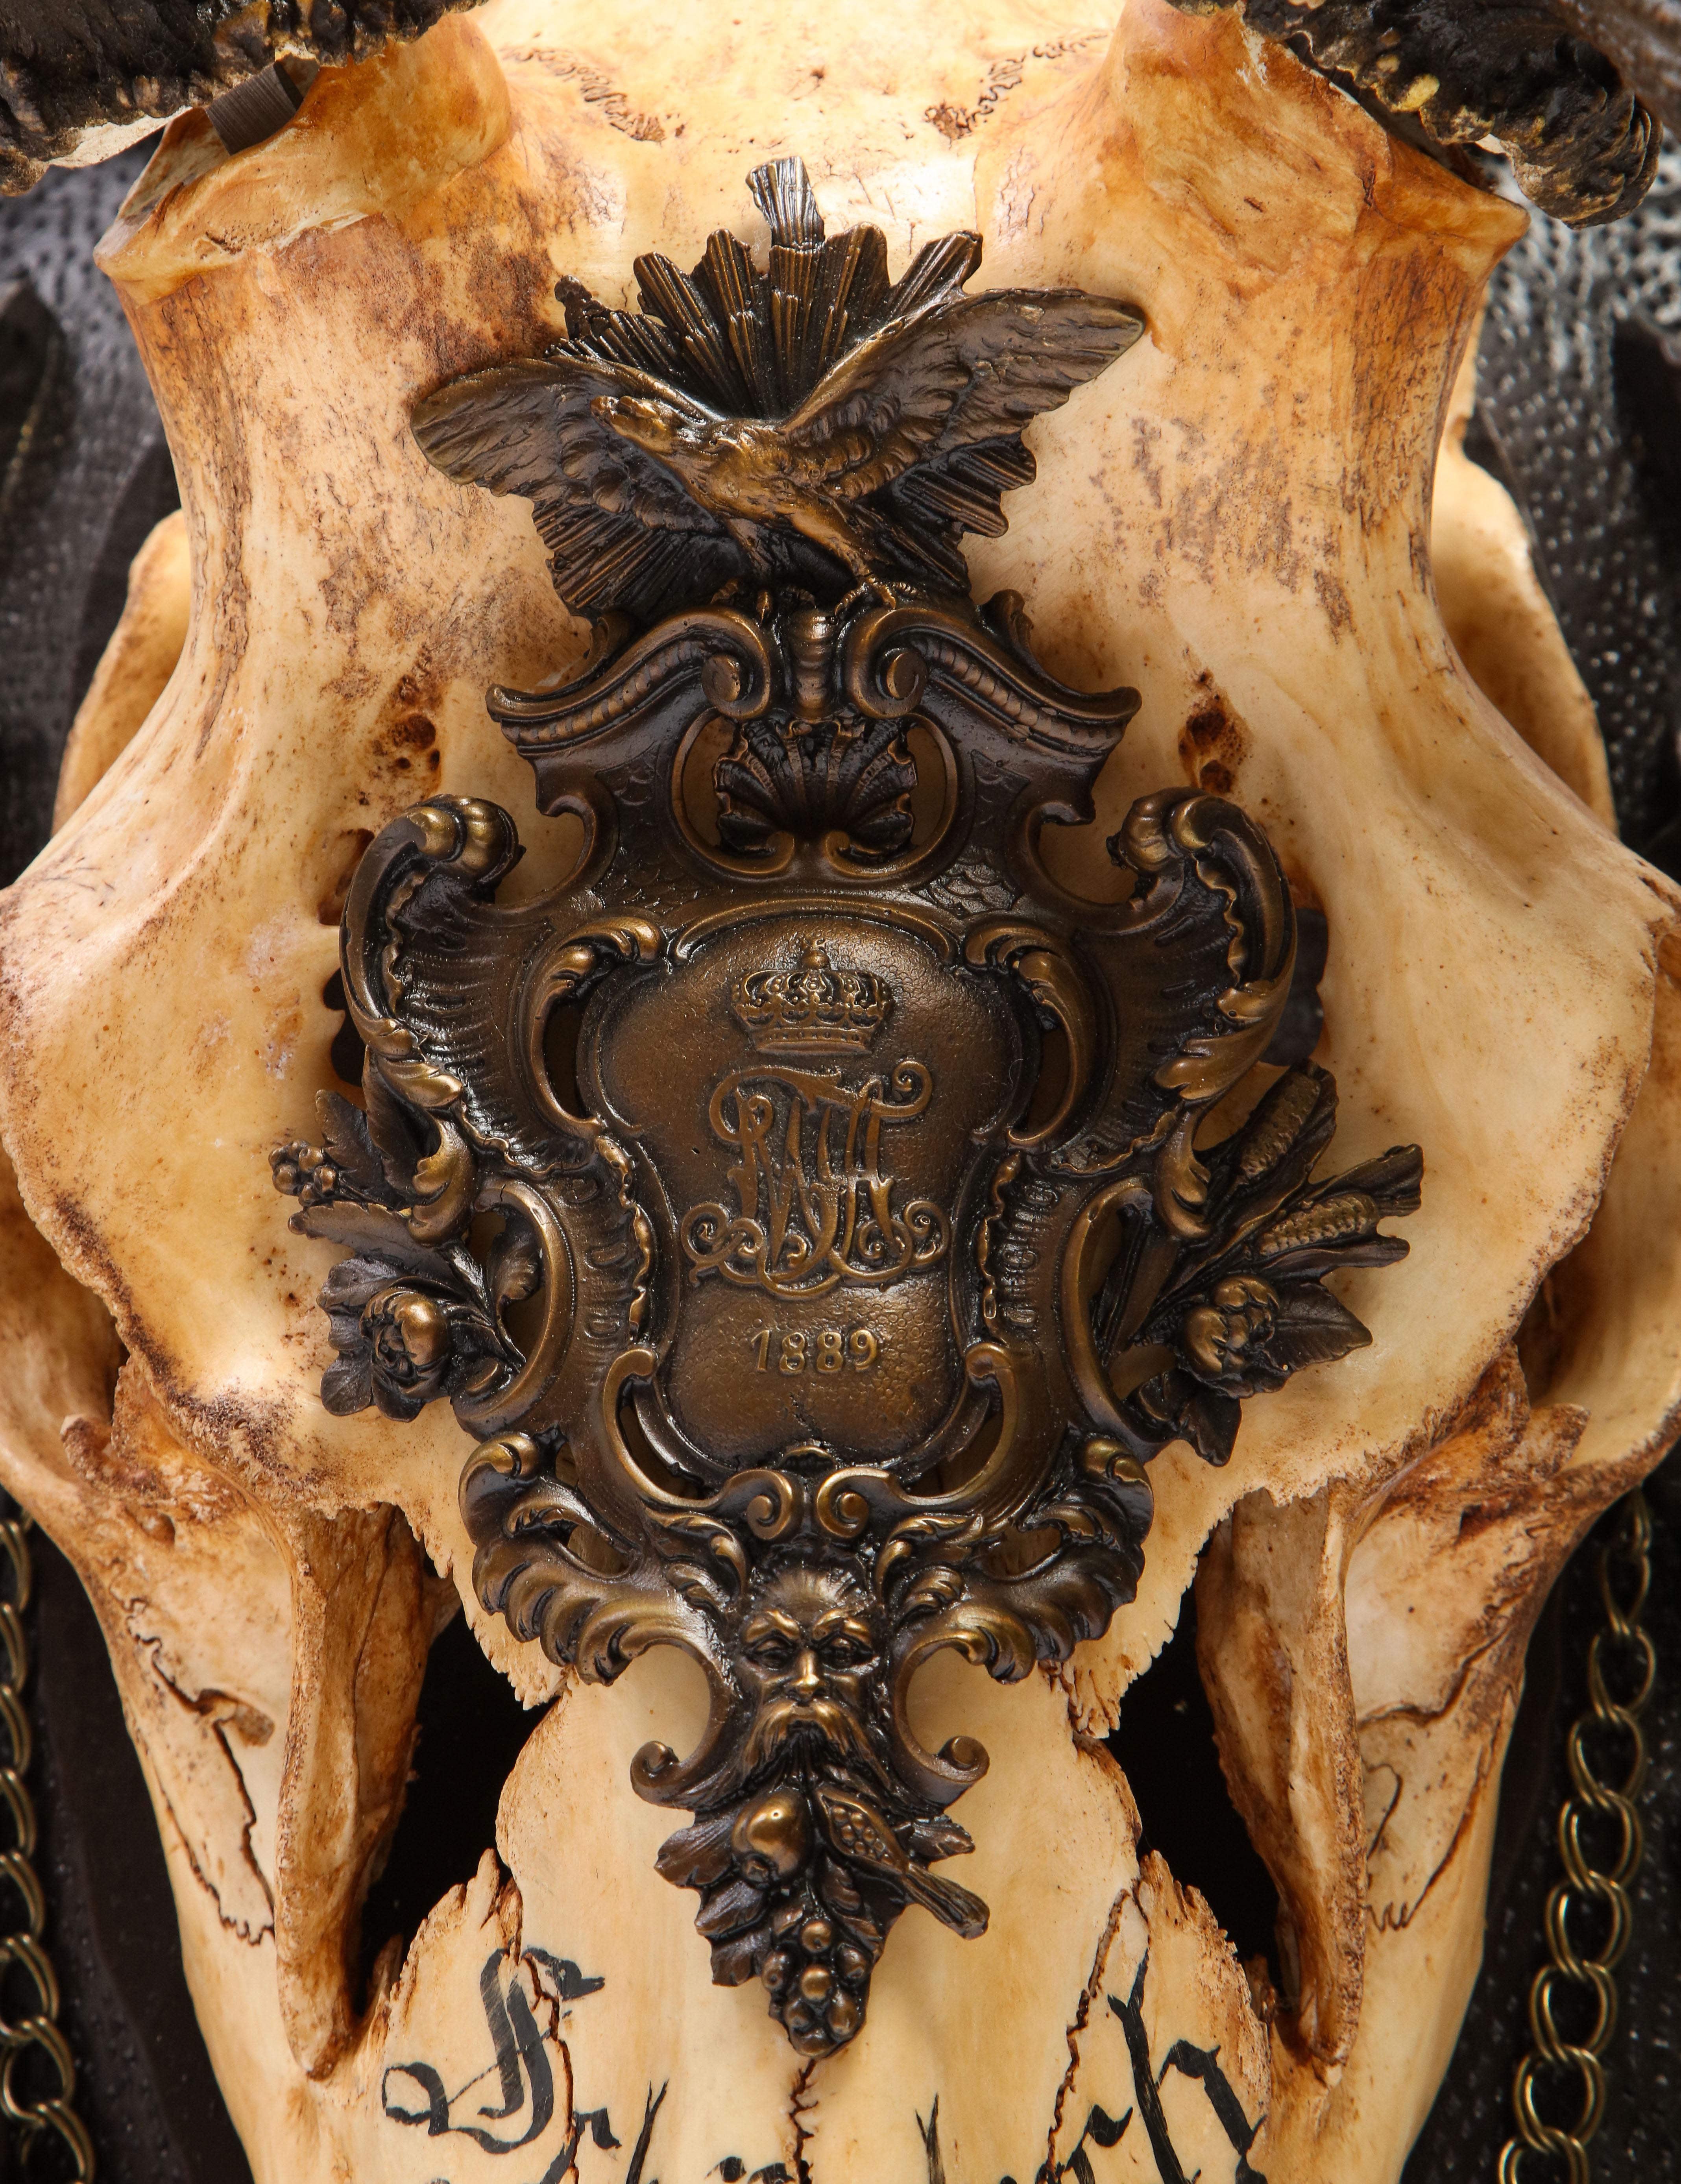 Late 19th Century Swiss 'Black Forest' Large Antler Trophy Mount, Dated 1889